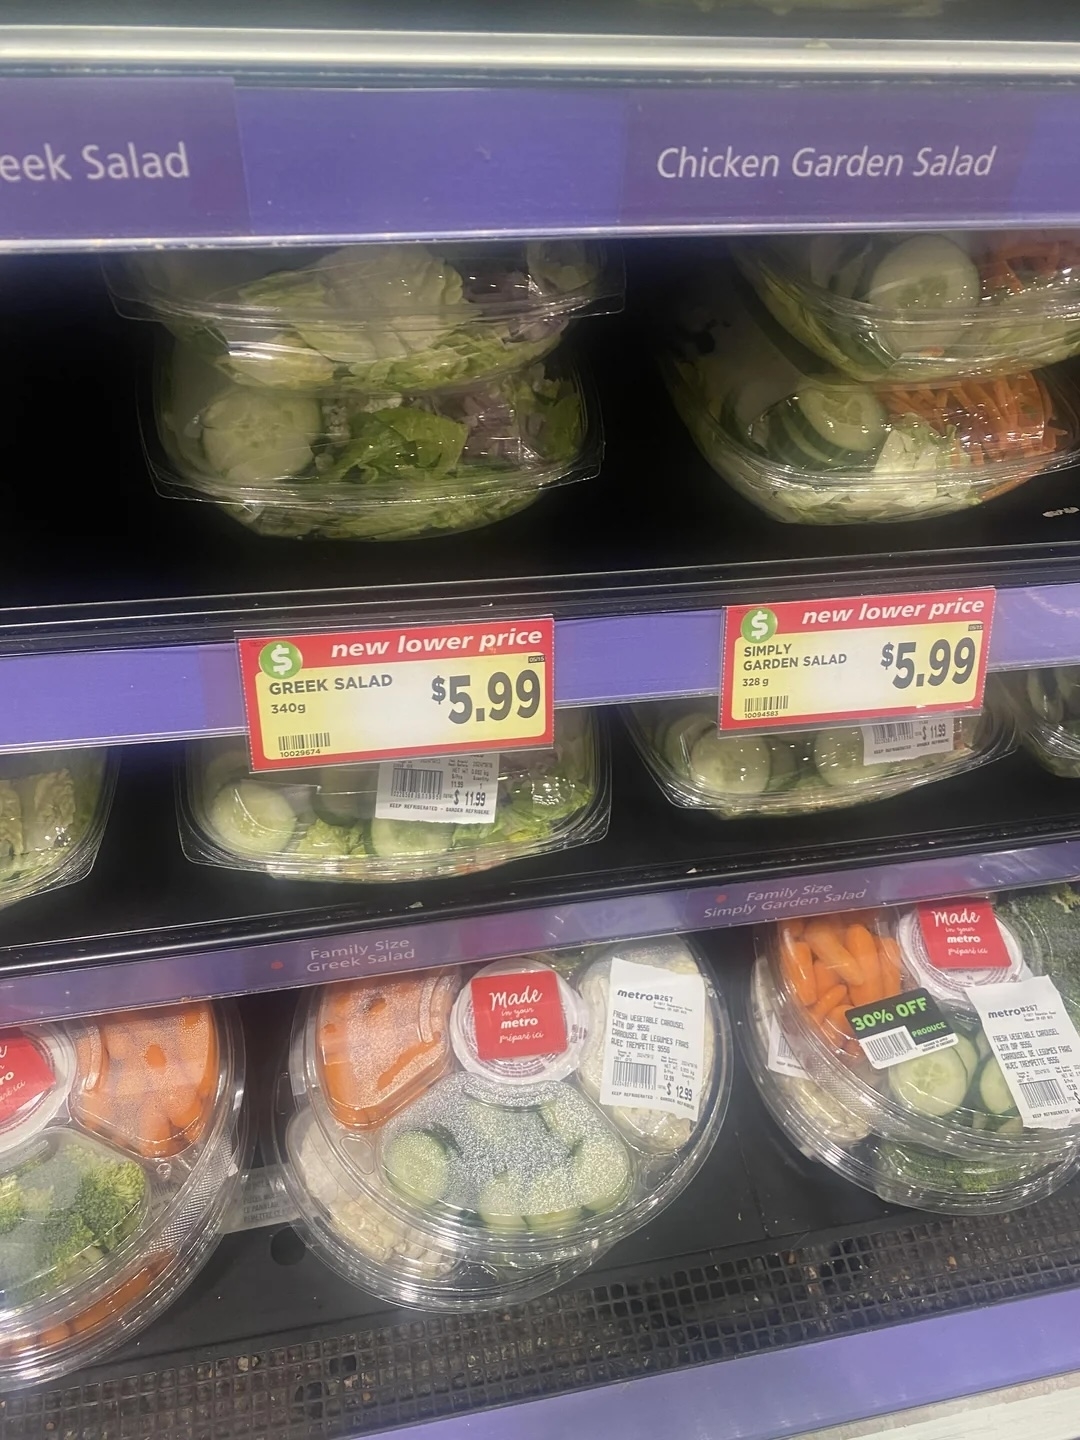 Supermarket shelf with various salads, new lower price labels at $5.99, Greek and Garden salads visible